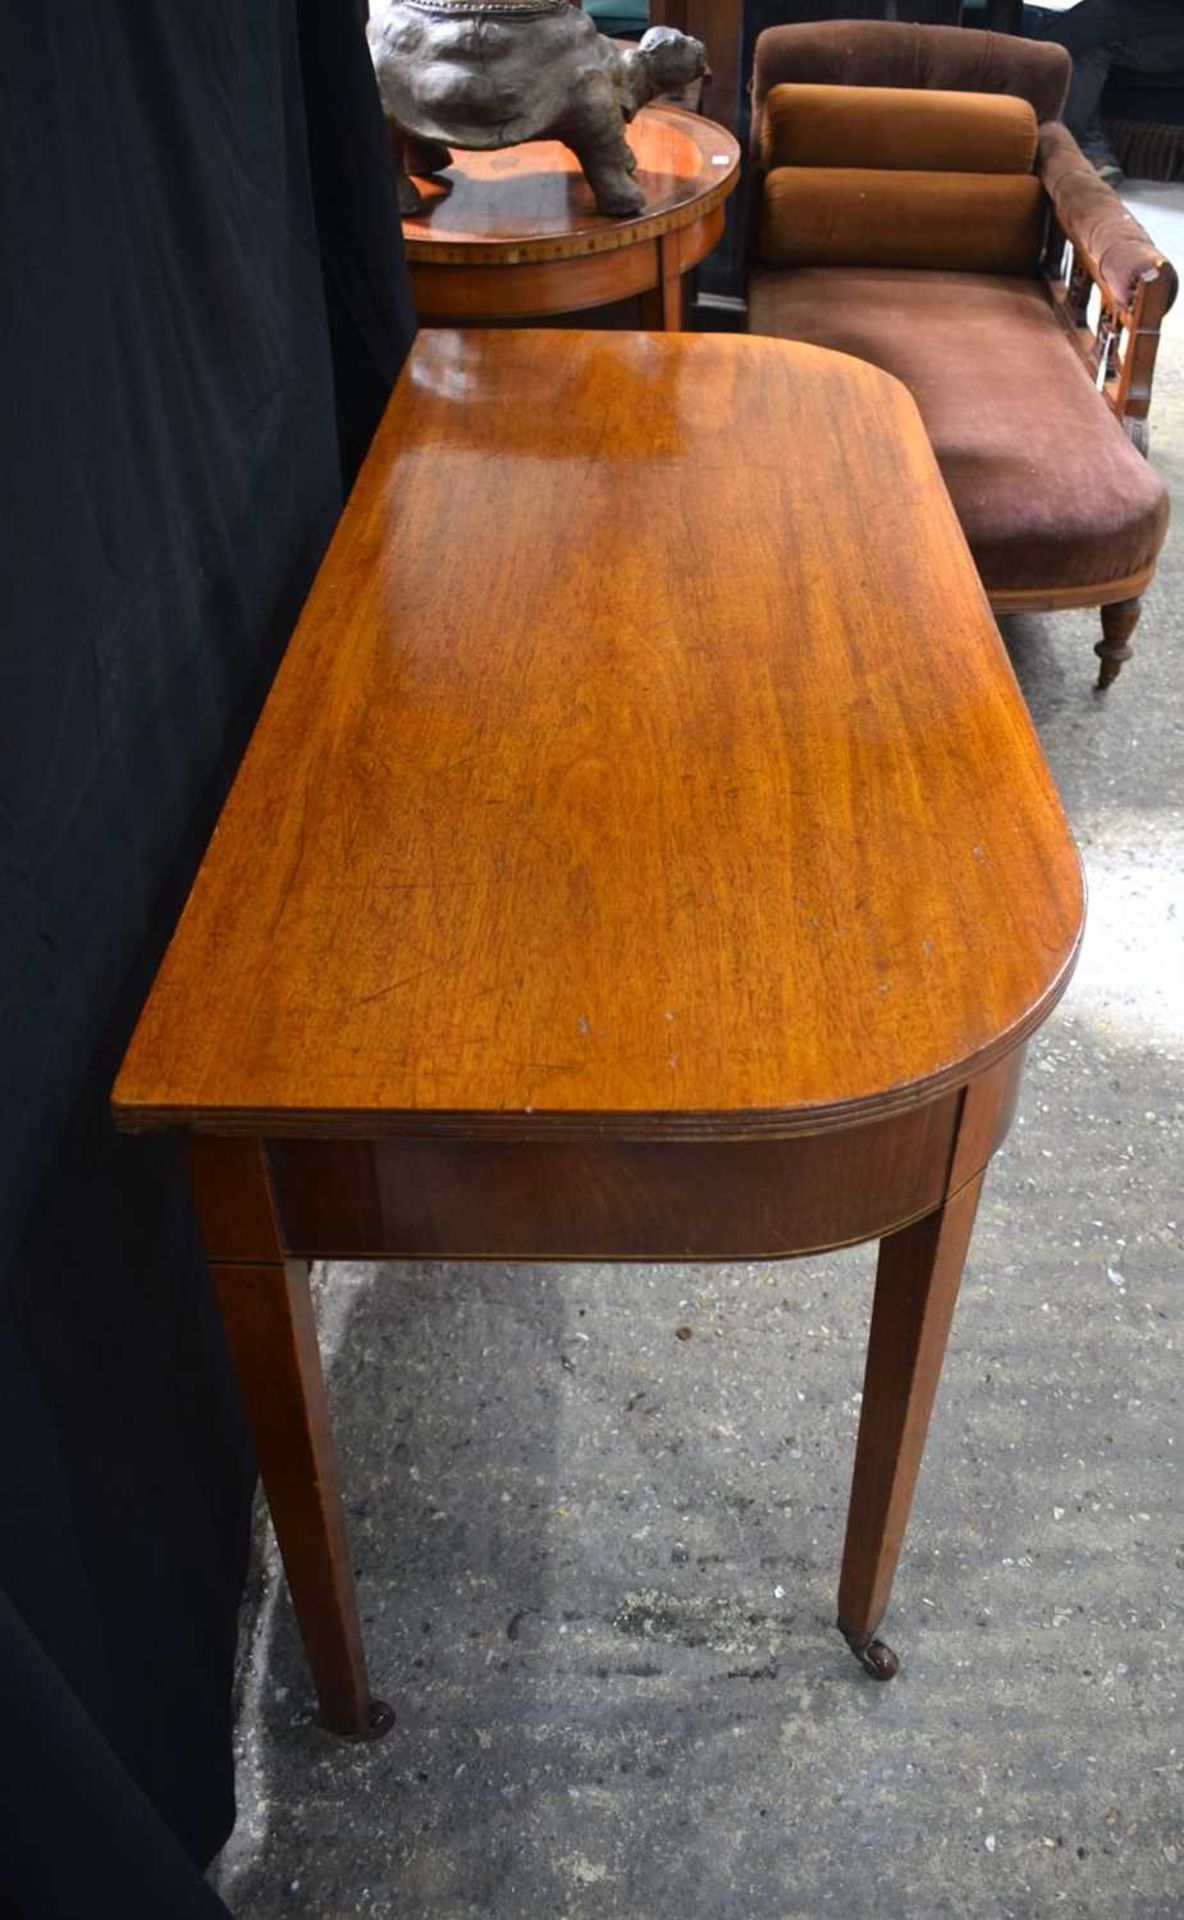 A 19th Century Bow fronted mahogany top side table with castored legs 75 x 124 x 53 cm. - Image 3 of 4